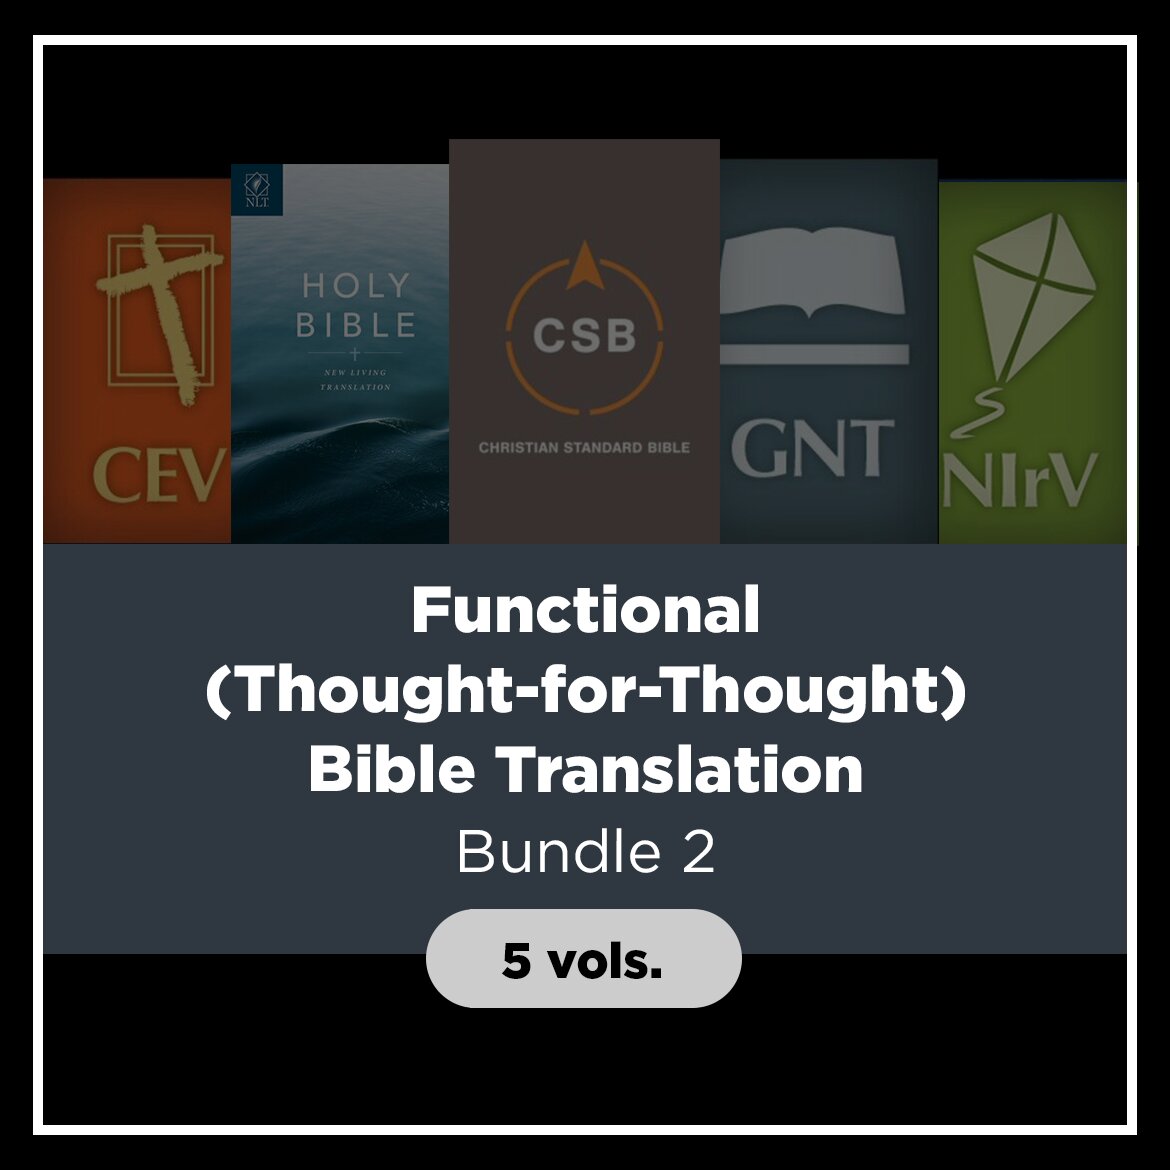 Functional (Thought-for-Thought) Bible Translation Bundle 2, 5 vols.